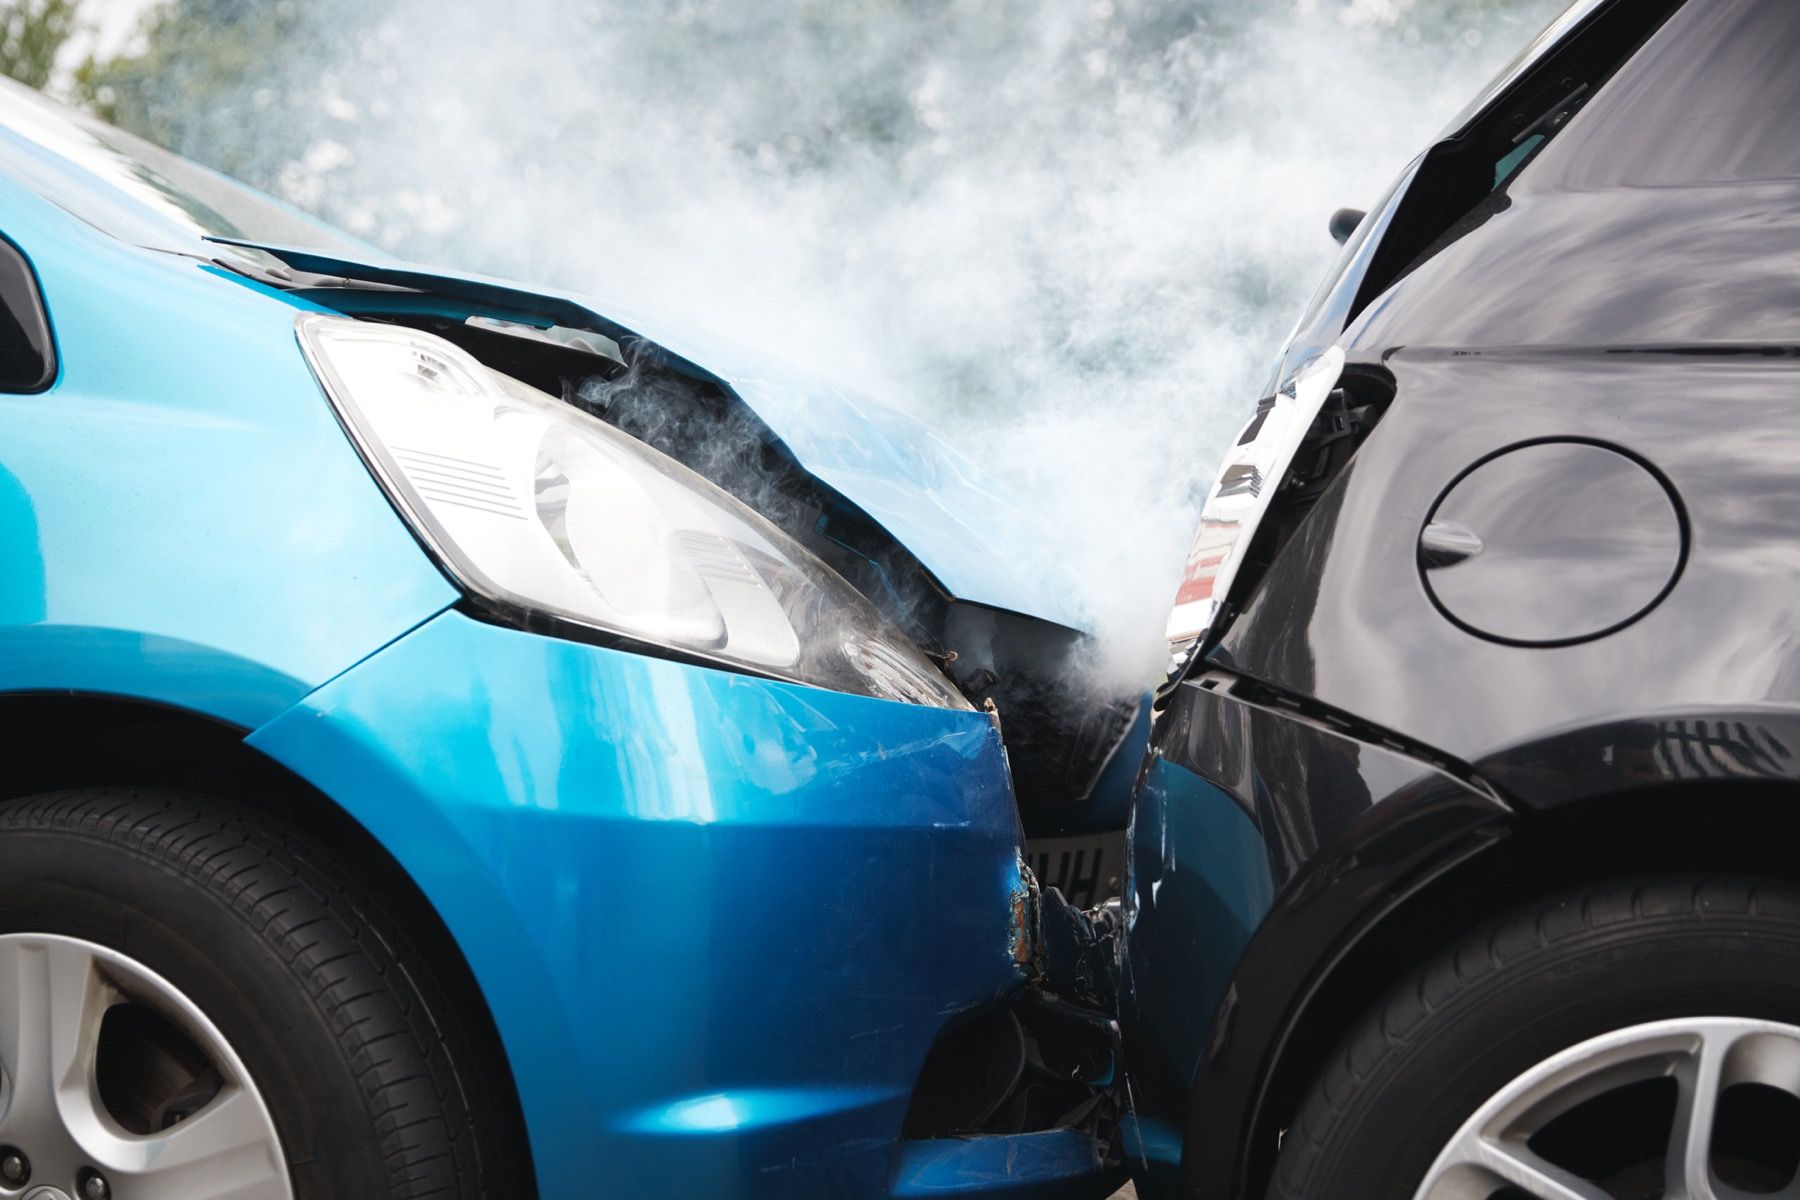 What auto insurance benefits can passengers access after a collision?